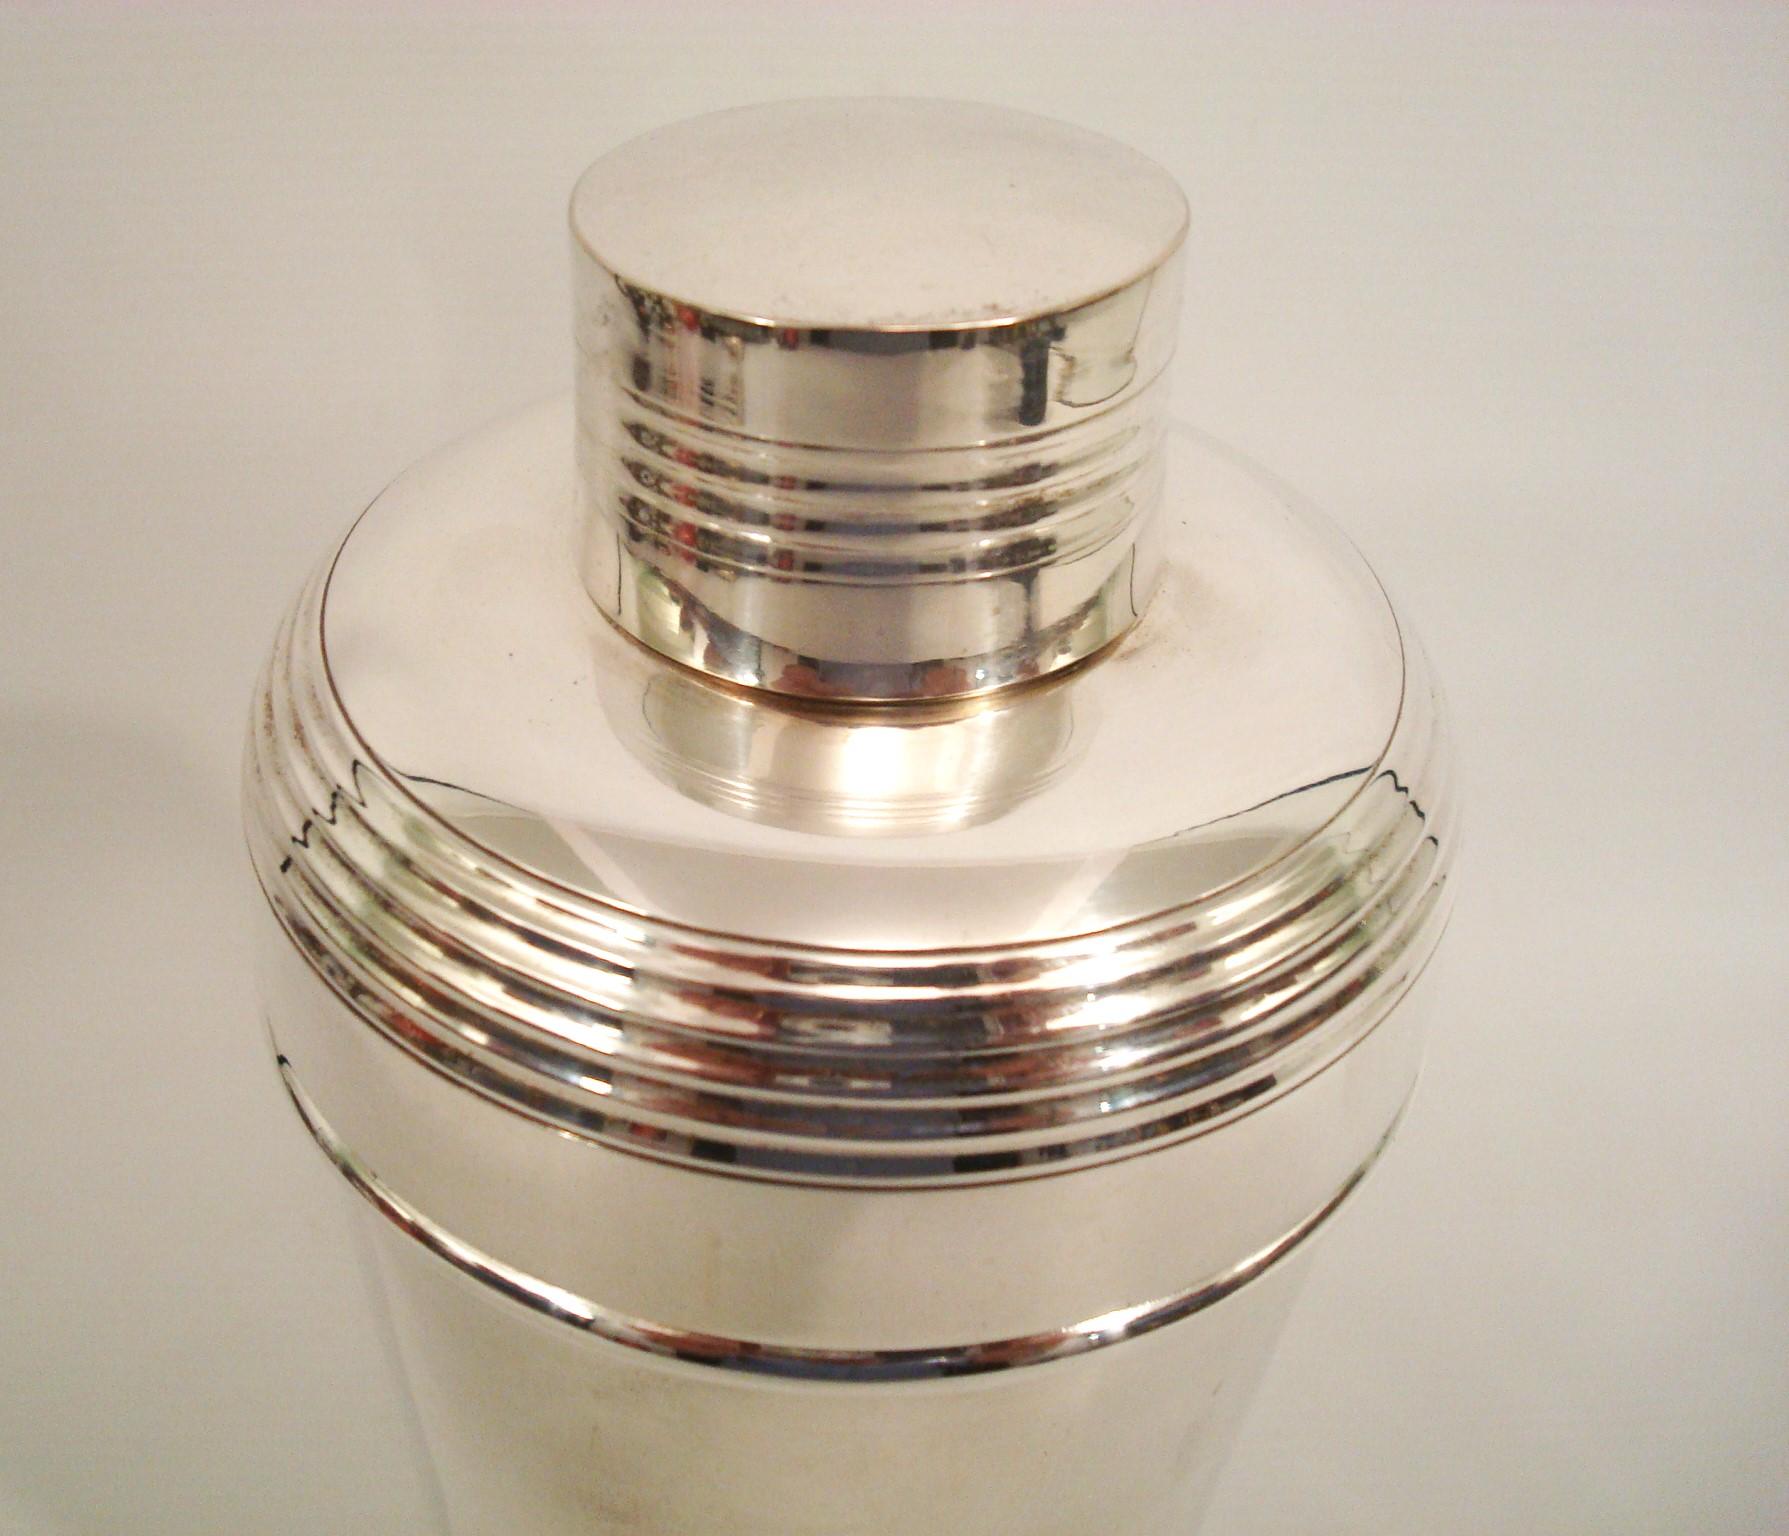 20th Century French Art Deco Silver Plate Cocktail Shaker by Hermes Paris